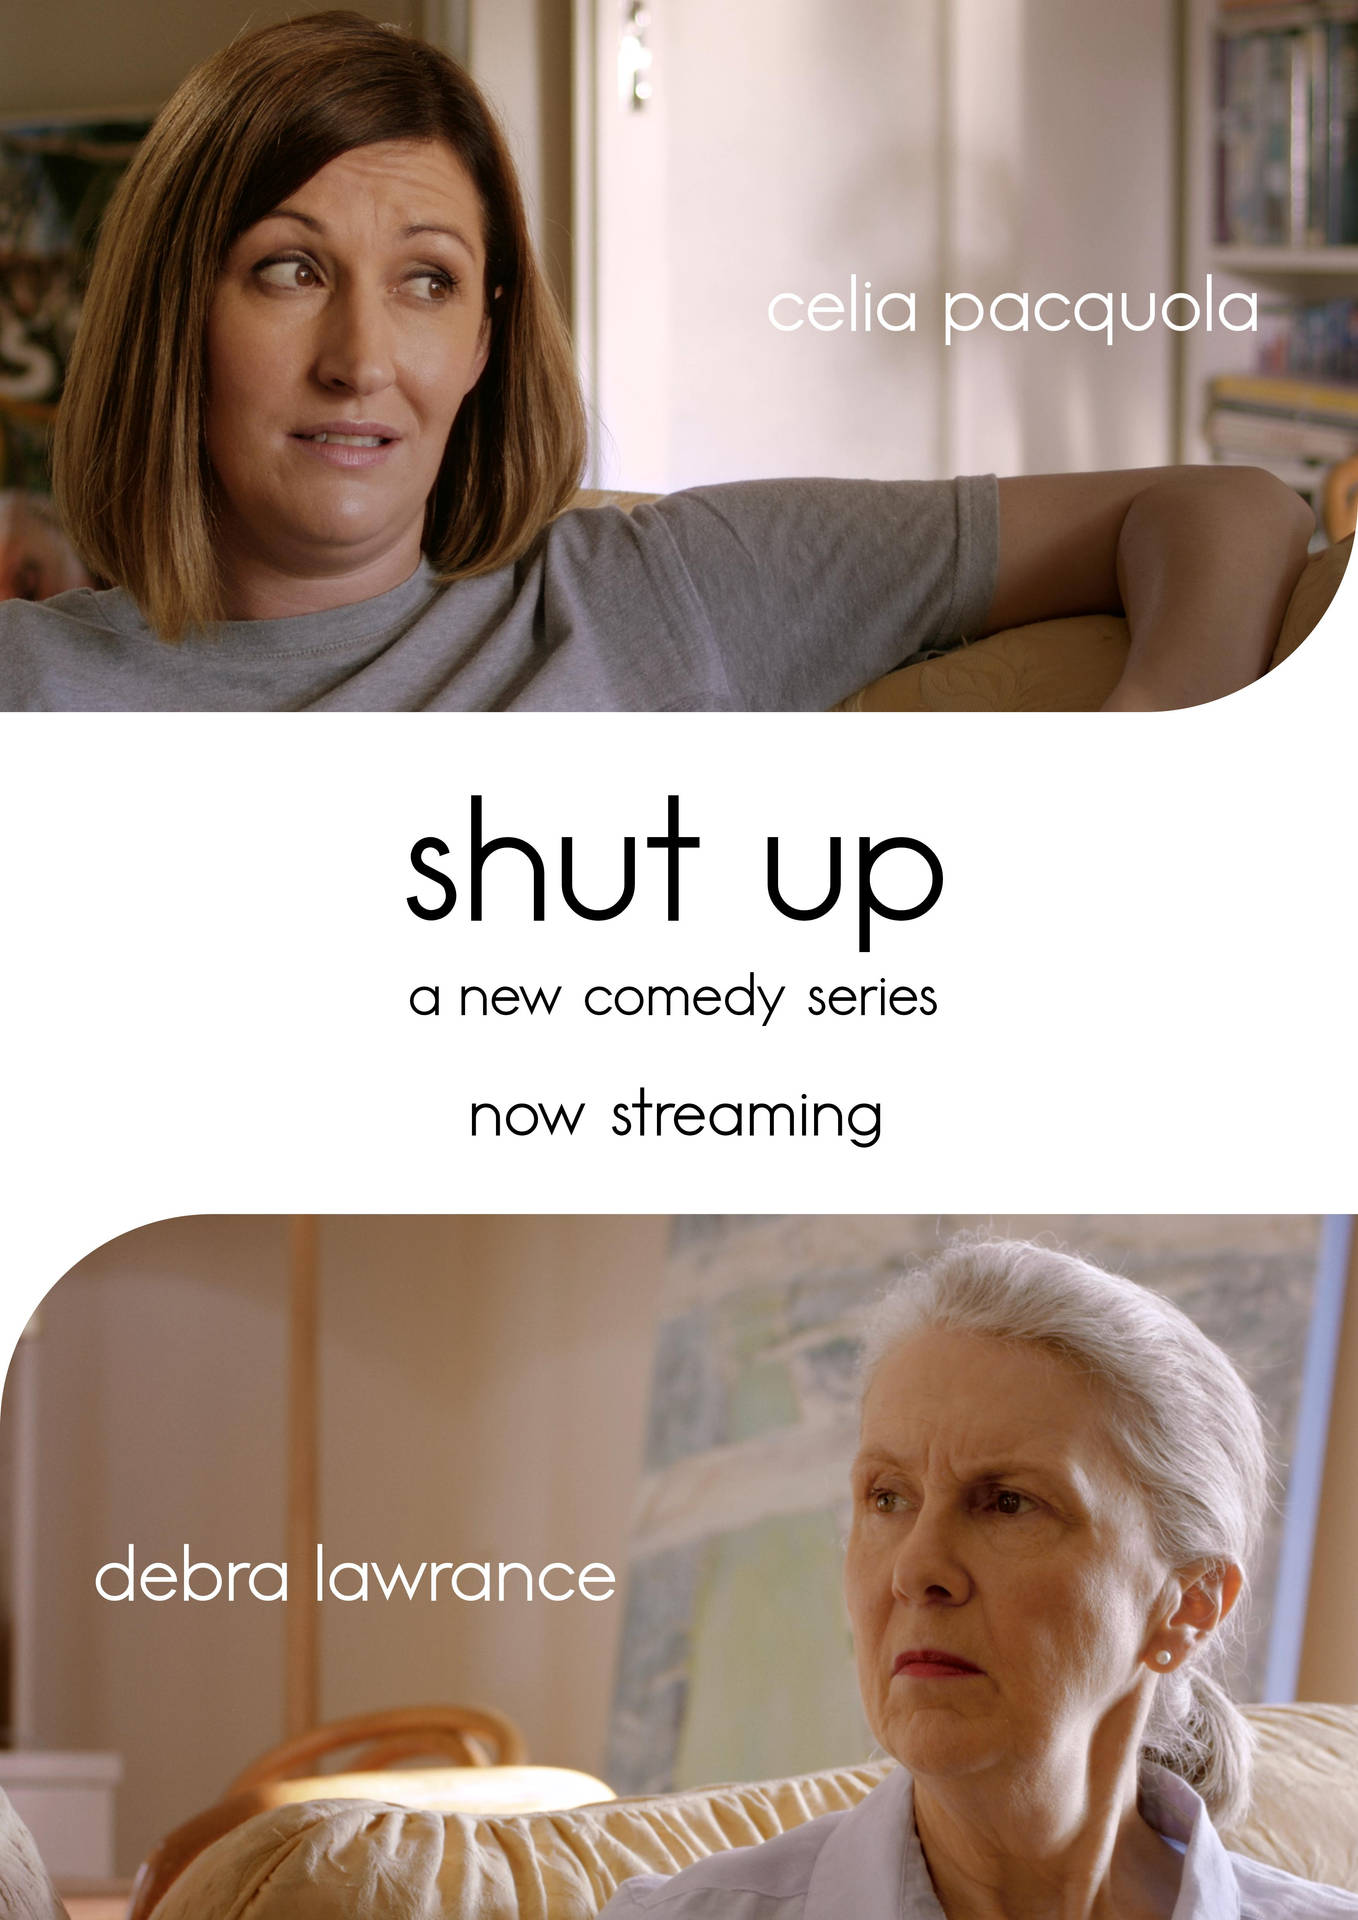 Shut Up Comedy Official Poster